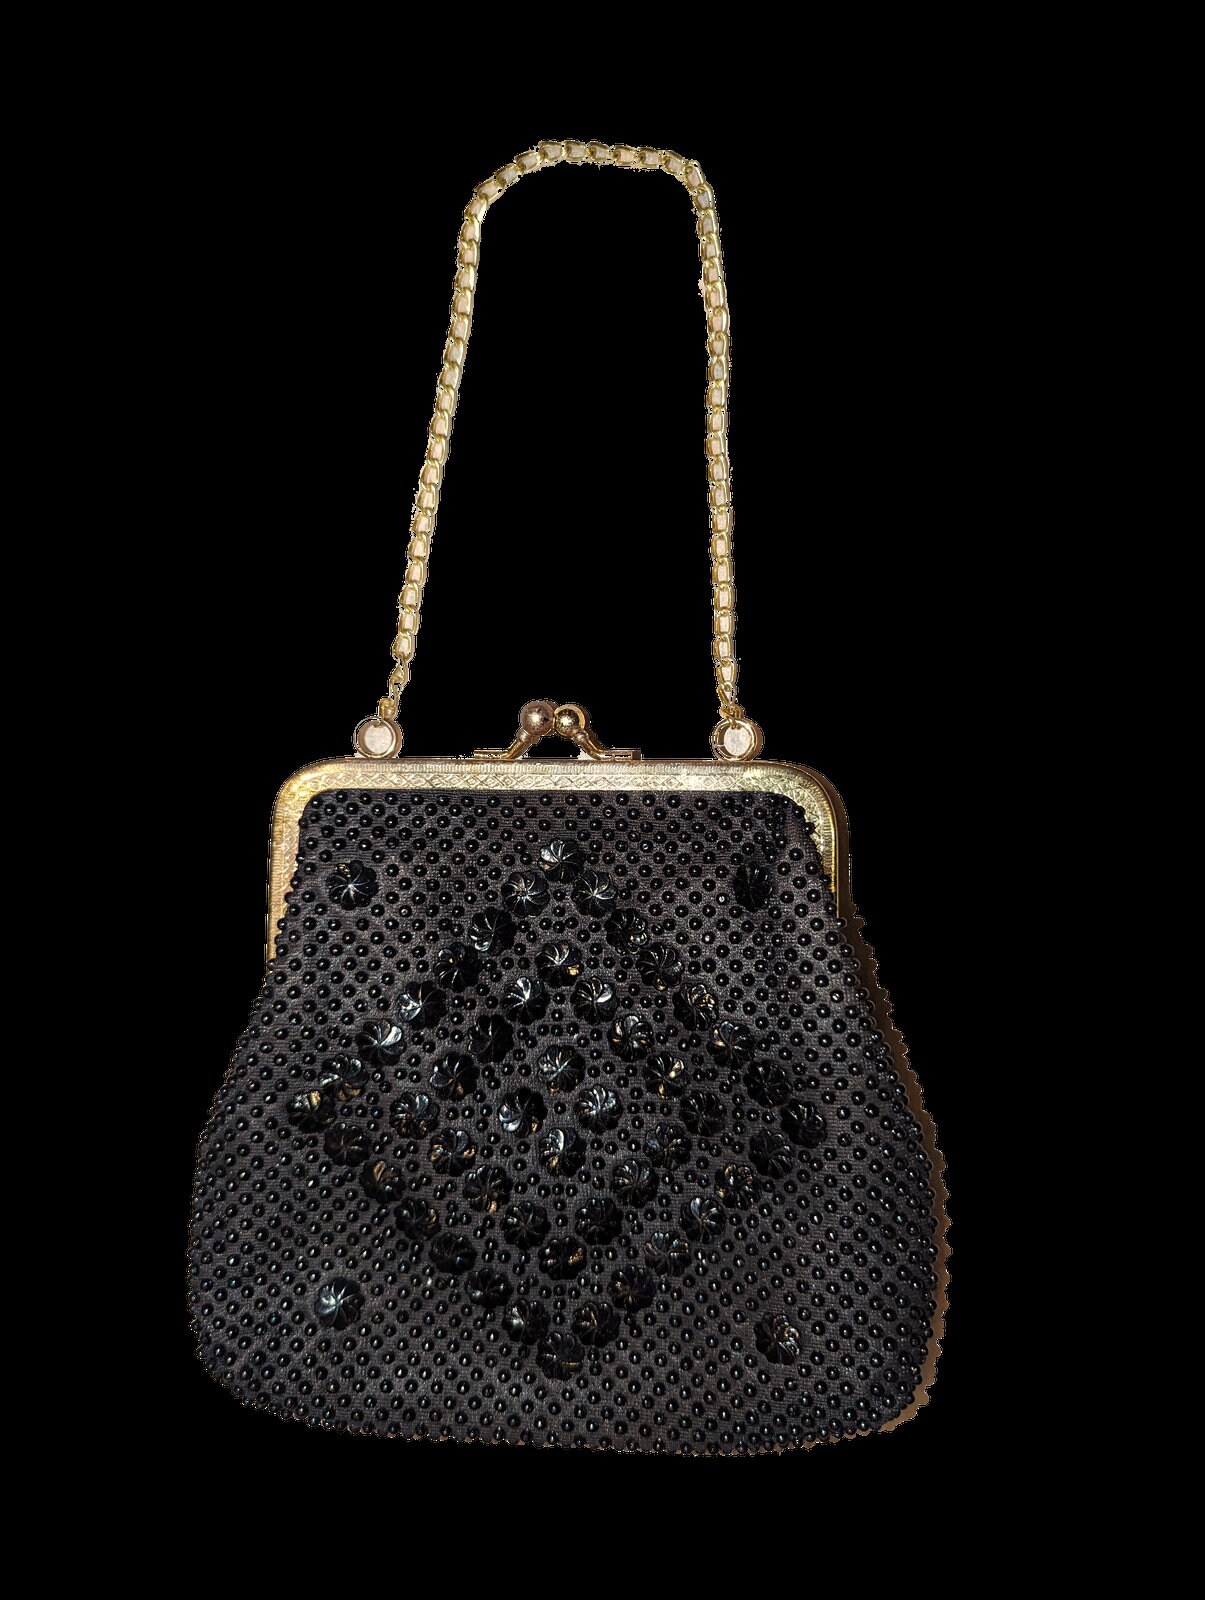 Black Gold Box Bag Purse Stars / Beaded / Zipper Closure / Handmade Seed  Beads / Unique Gifts for Her / Crossbody Long Strap / Canvas Back 